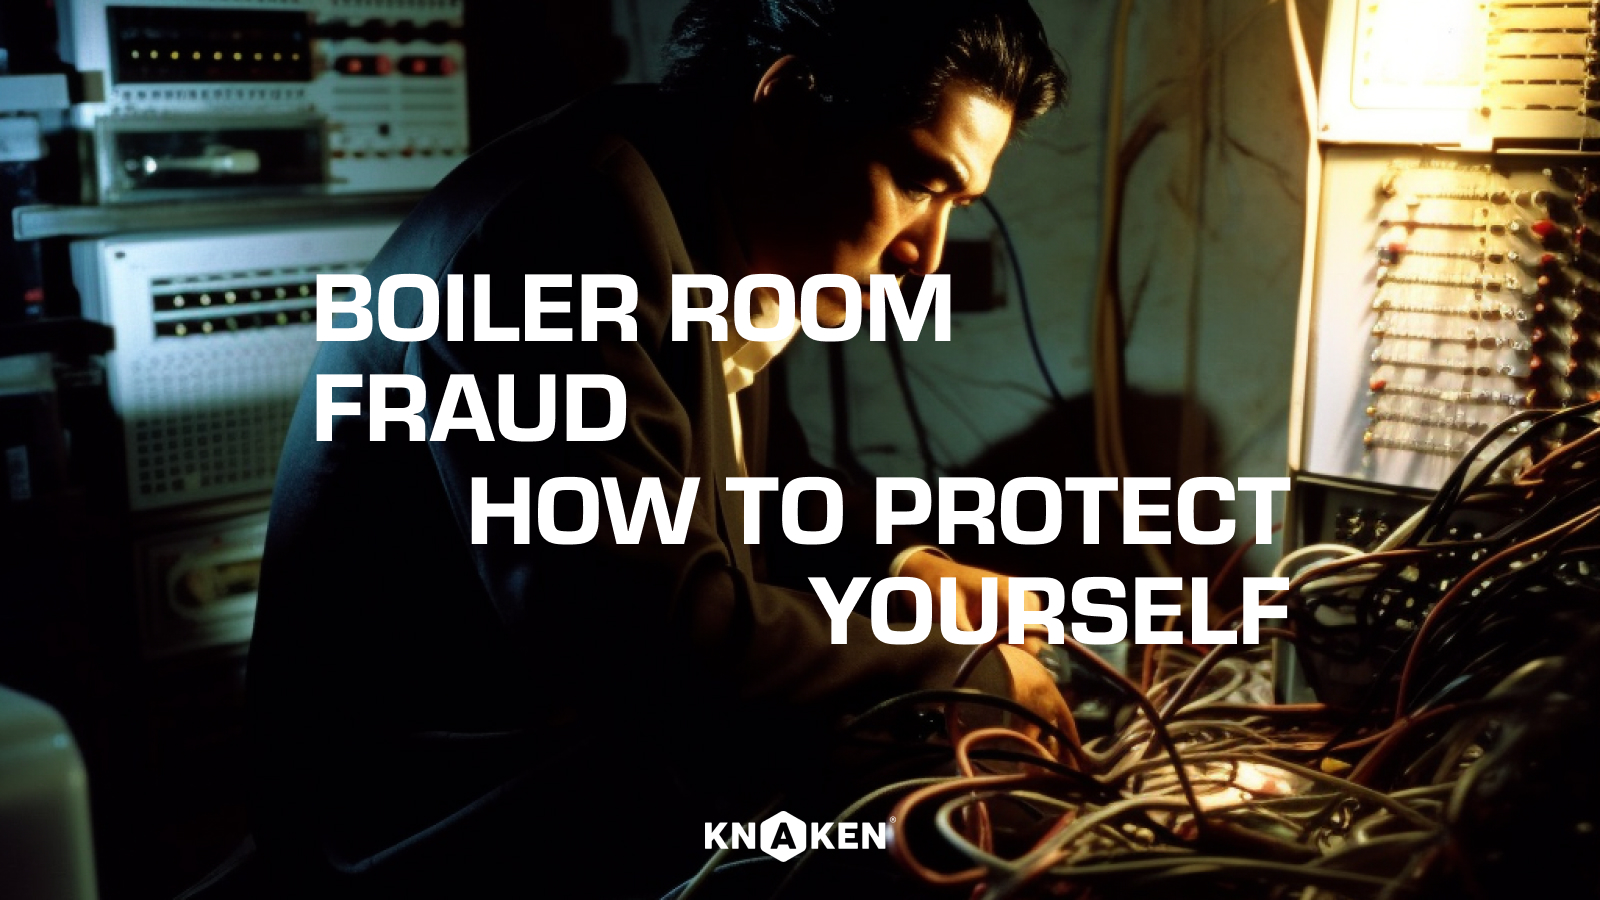 Boiler Room Fraud: What it is and How to Protect Yourself